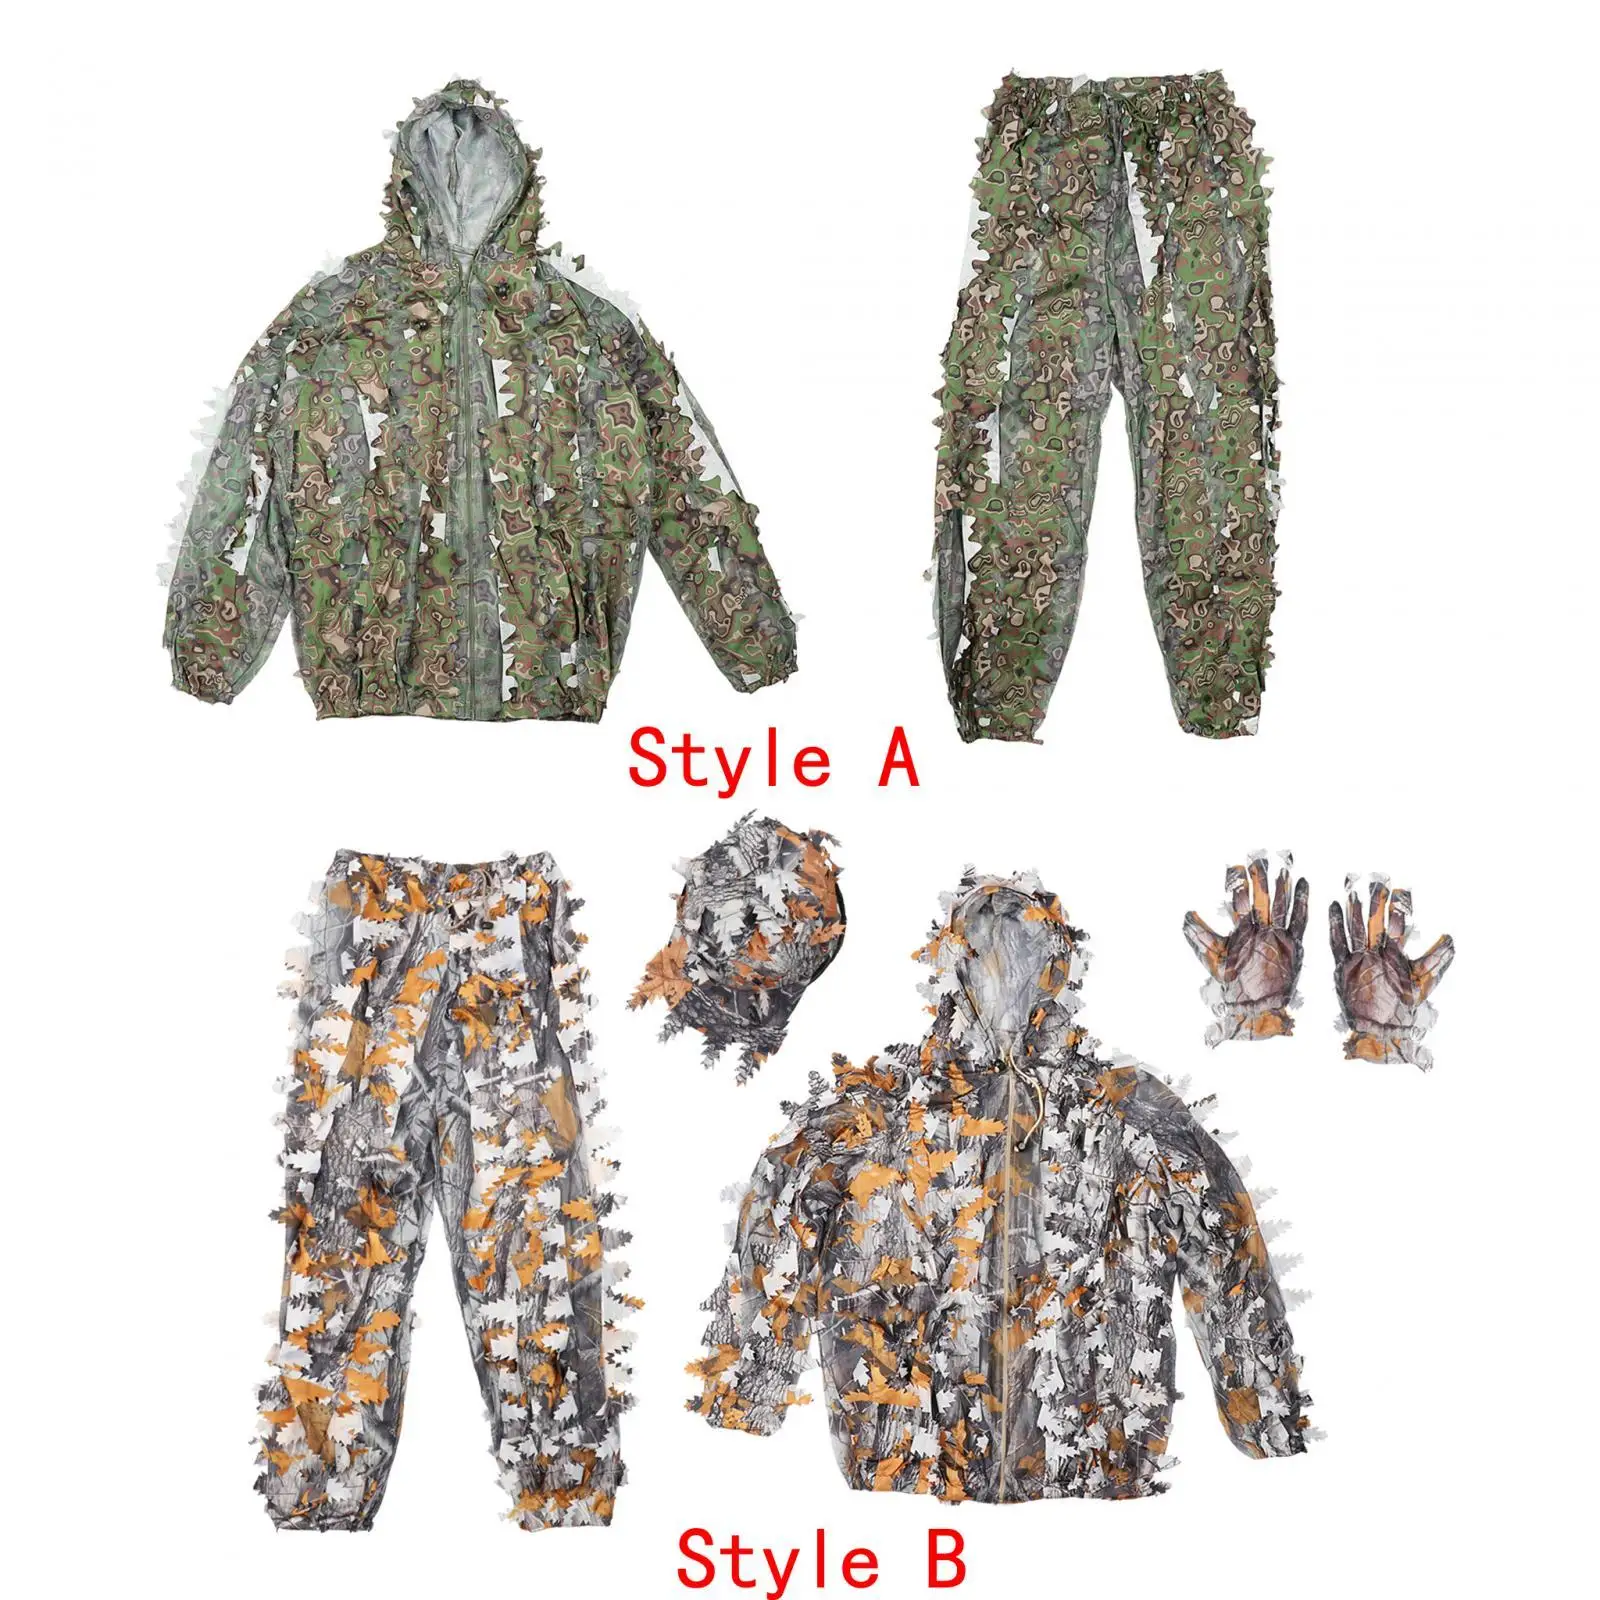 3D Leaves Ghillie Suit Set Hunting Woodland Pants Jacket Clothing Forest Camouflage for Camping Gardening Outdoor Farming Adults